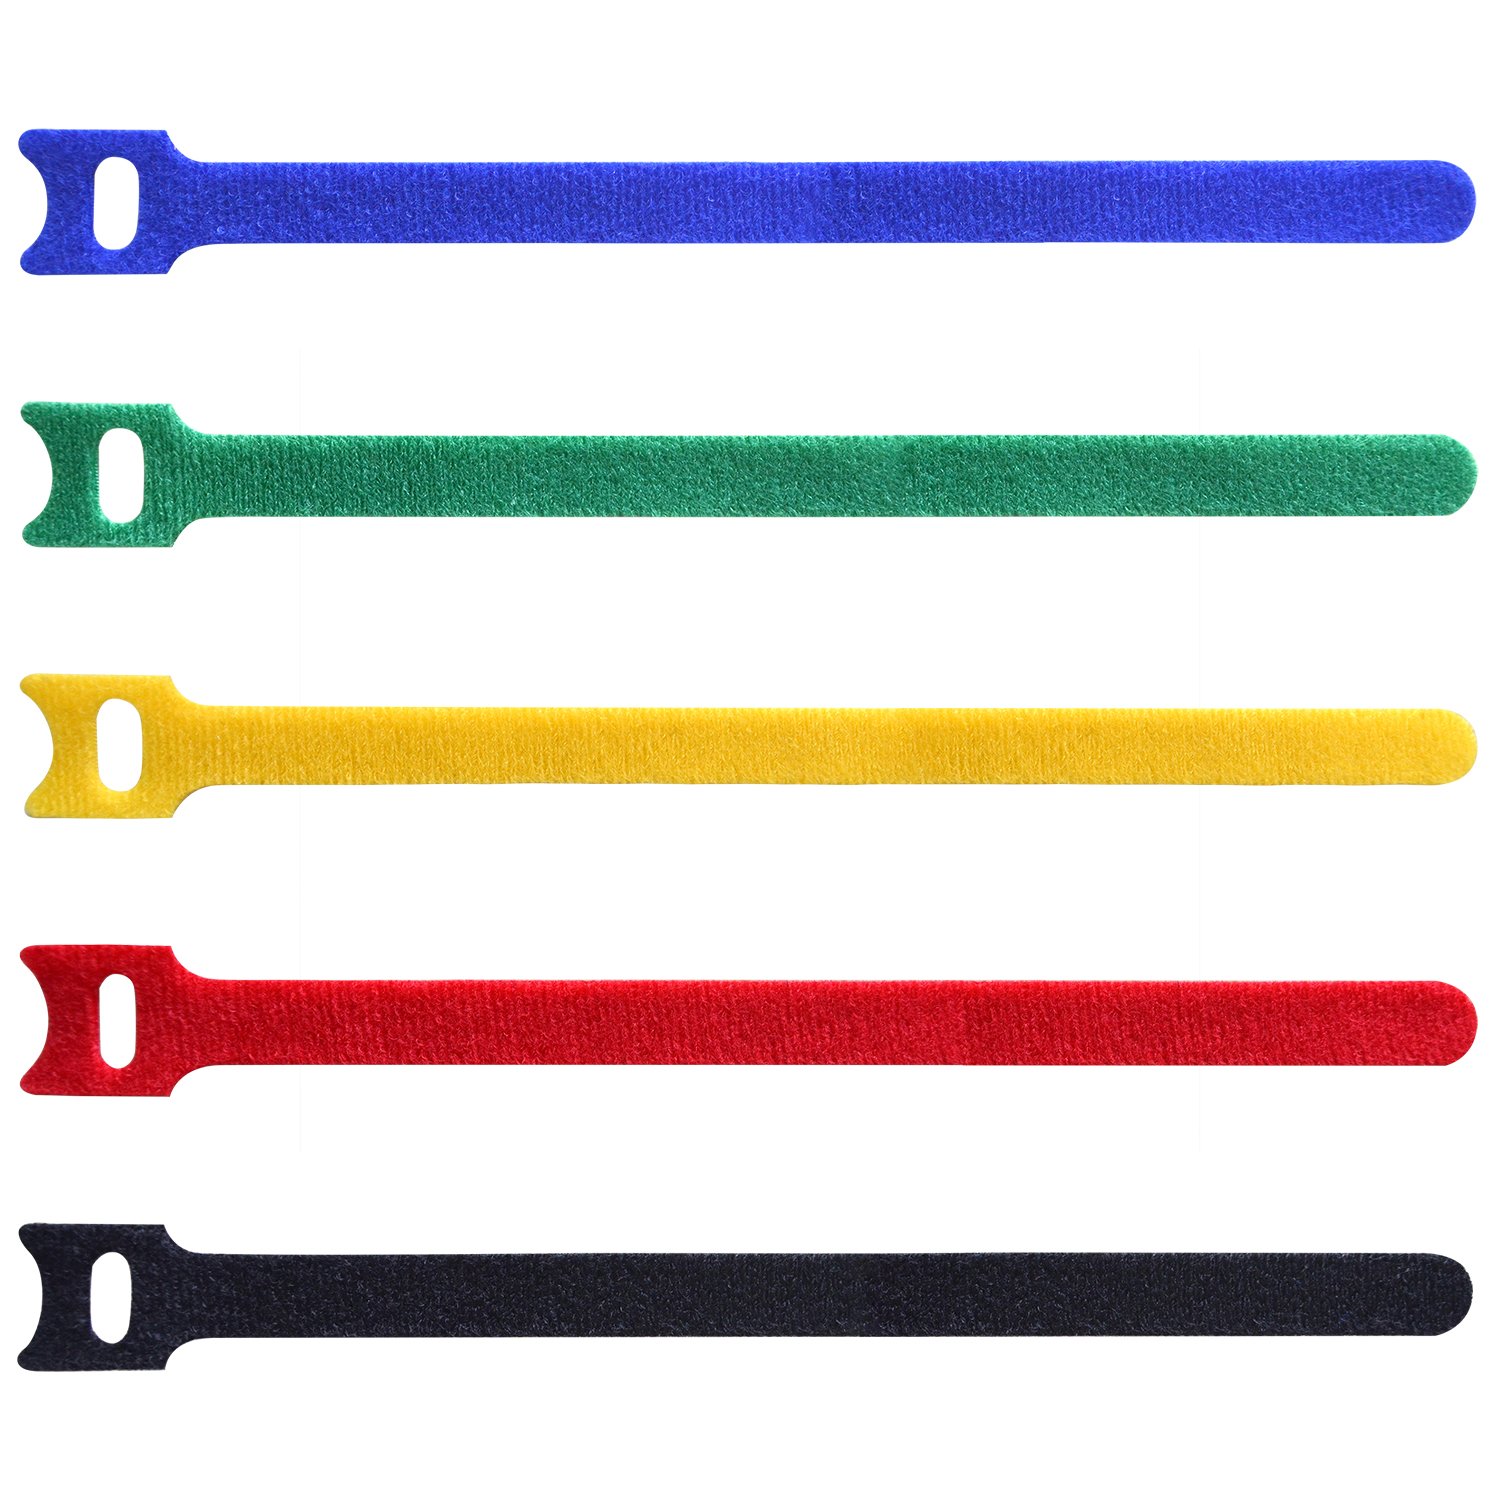 Details about   6 Inch Hook and Loop Reusable Strap Cable Cord Wire Ties 100 Pack Blue 